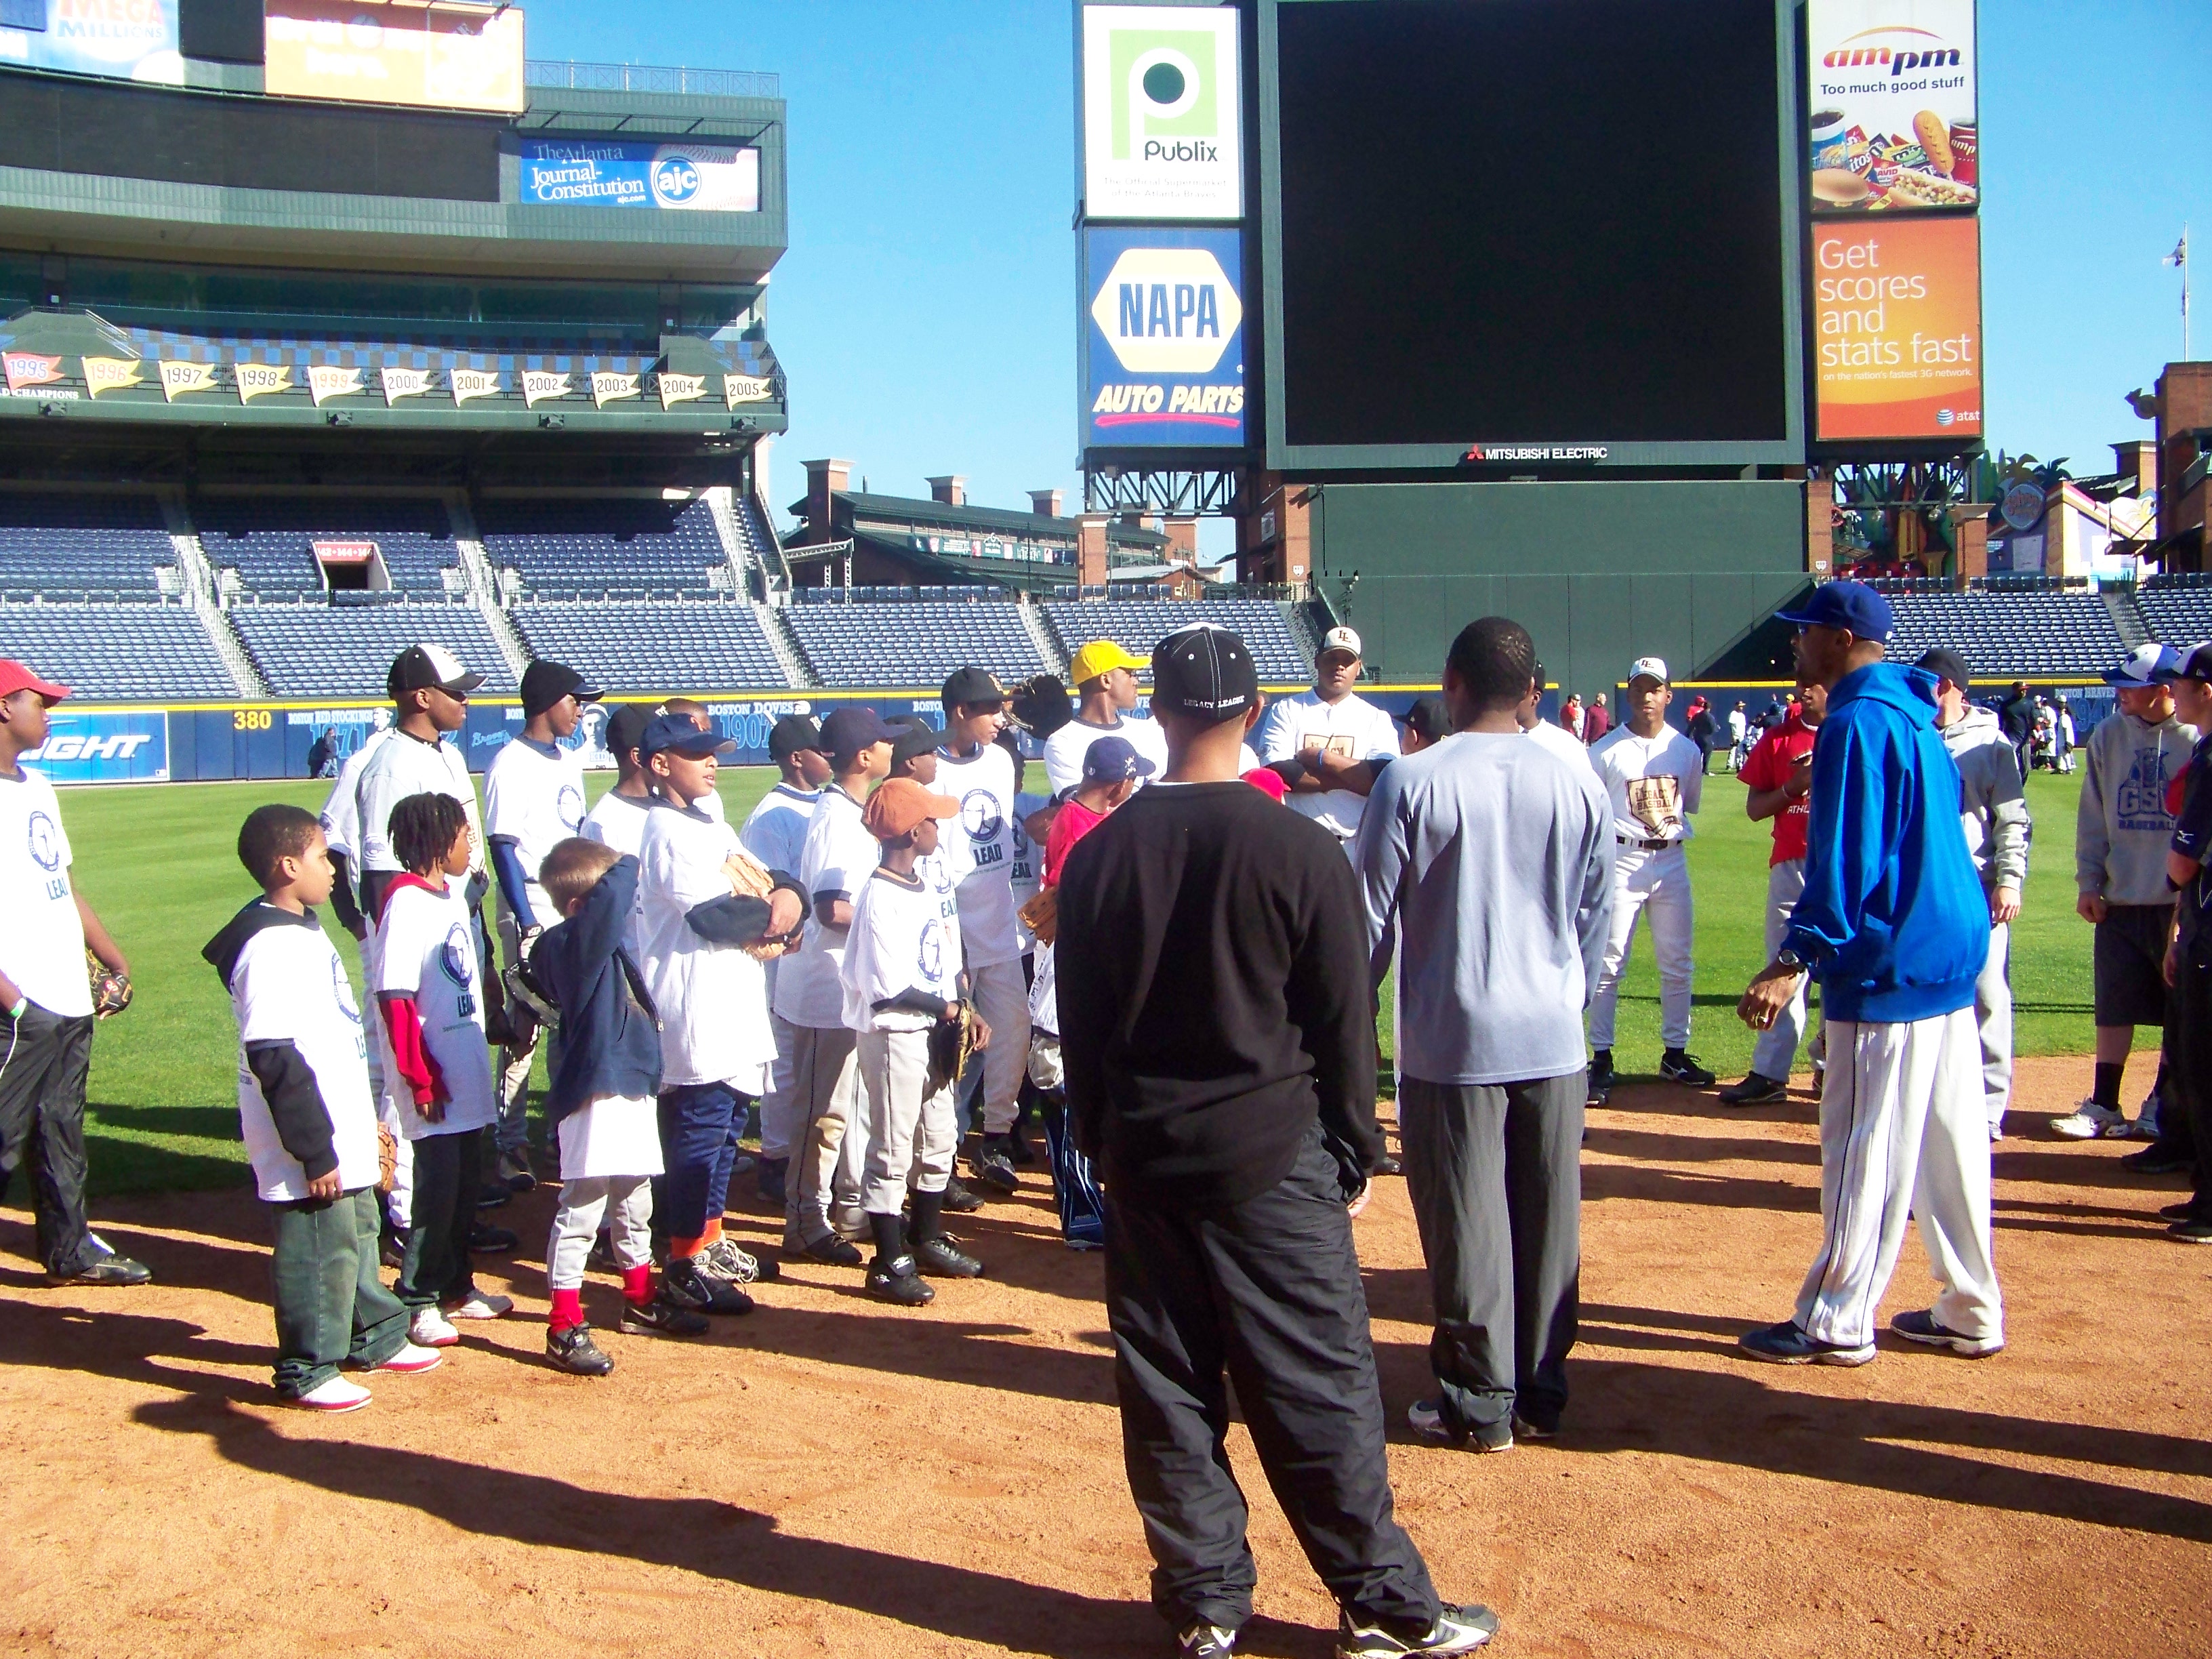 2009 Celebrity Clinic at Turner Field